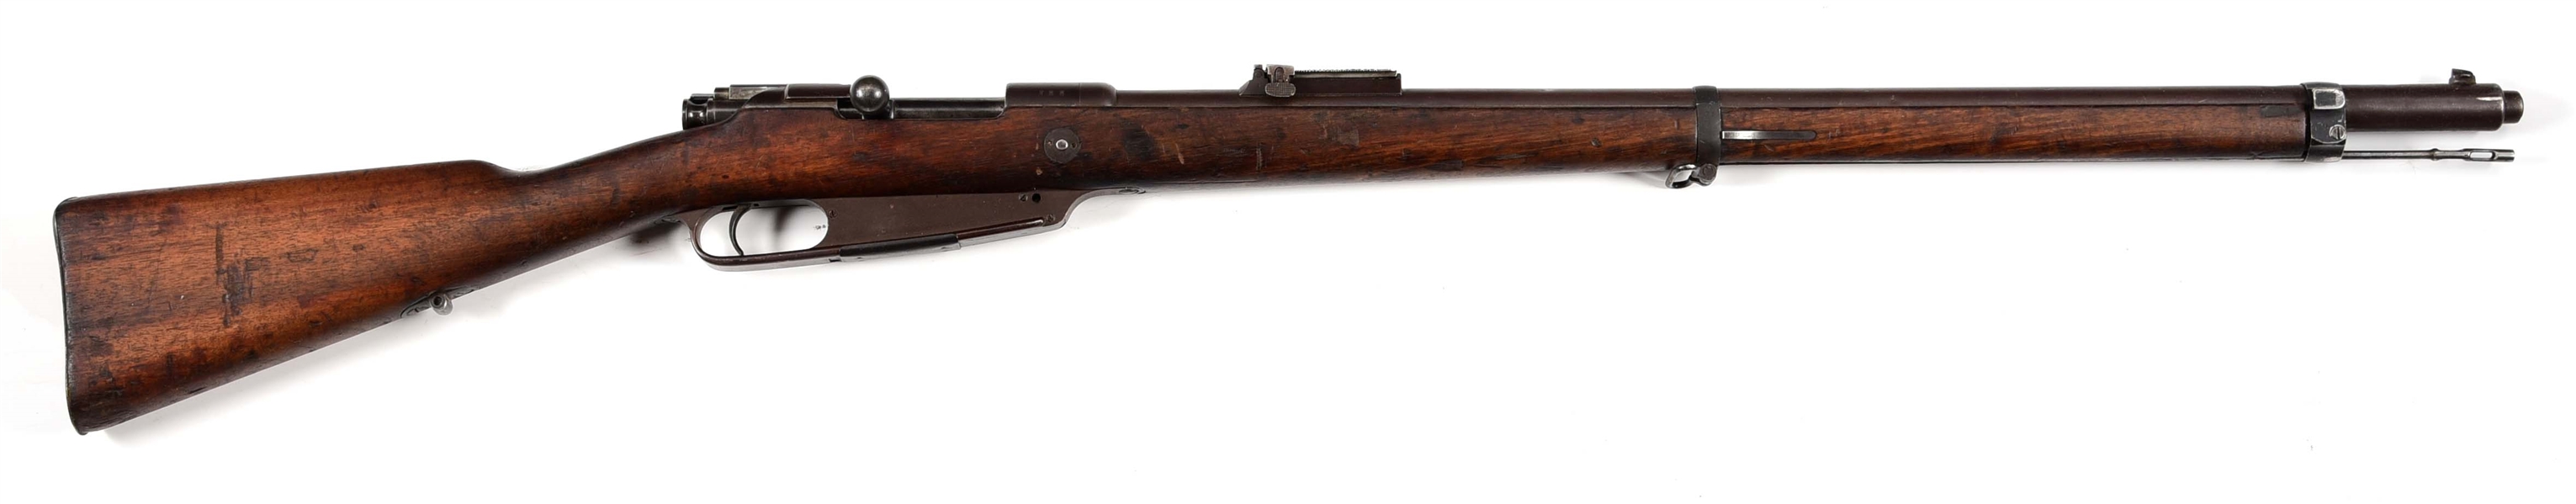 (A) AMBERG GEWEHR MODEL 1888 COMMISSION BOLT ACTION RIFLE.